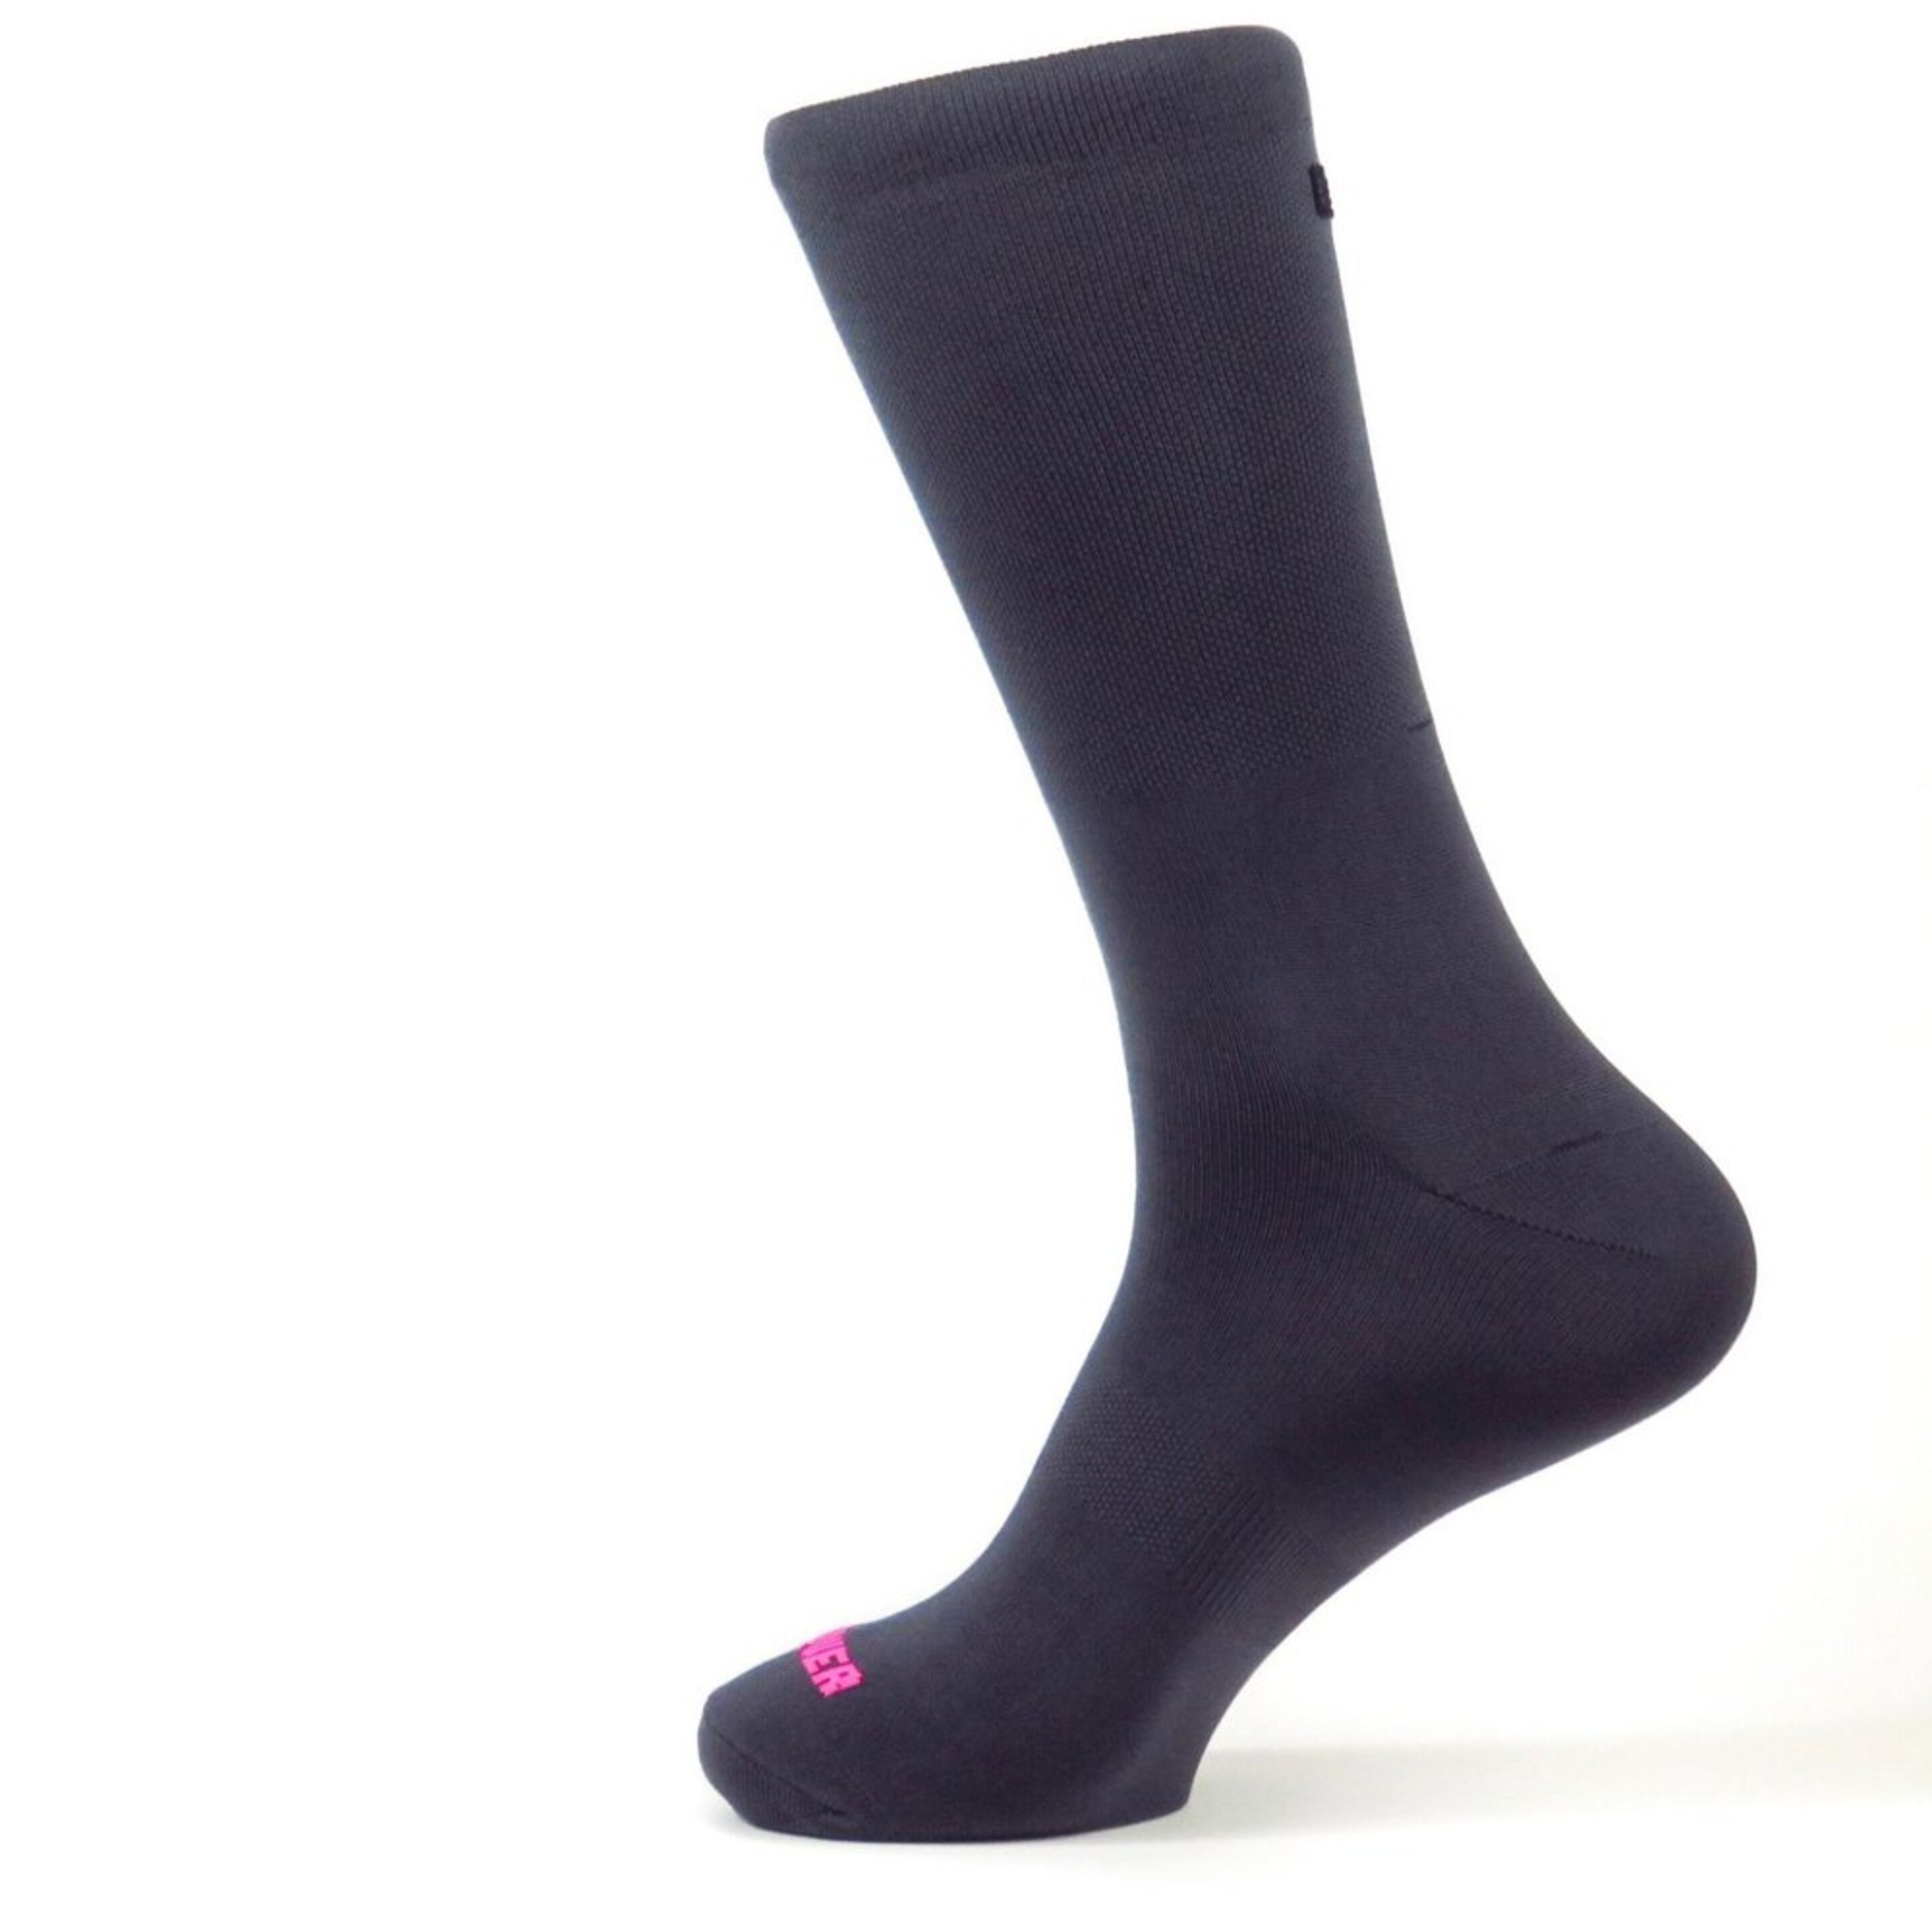 Calcetines Ciclismo Mooquer Classy Pinkgrey - gris - 